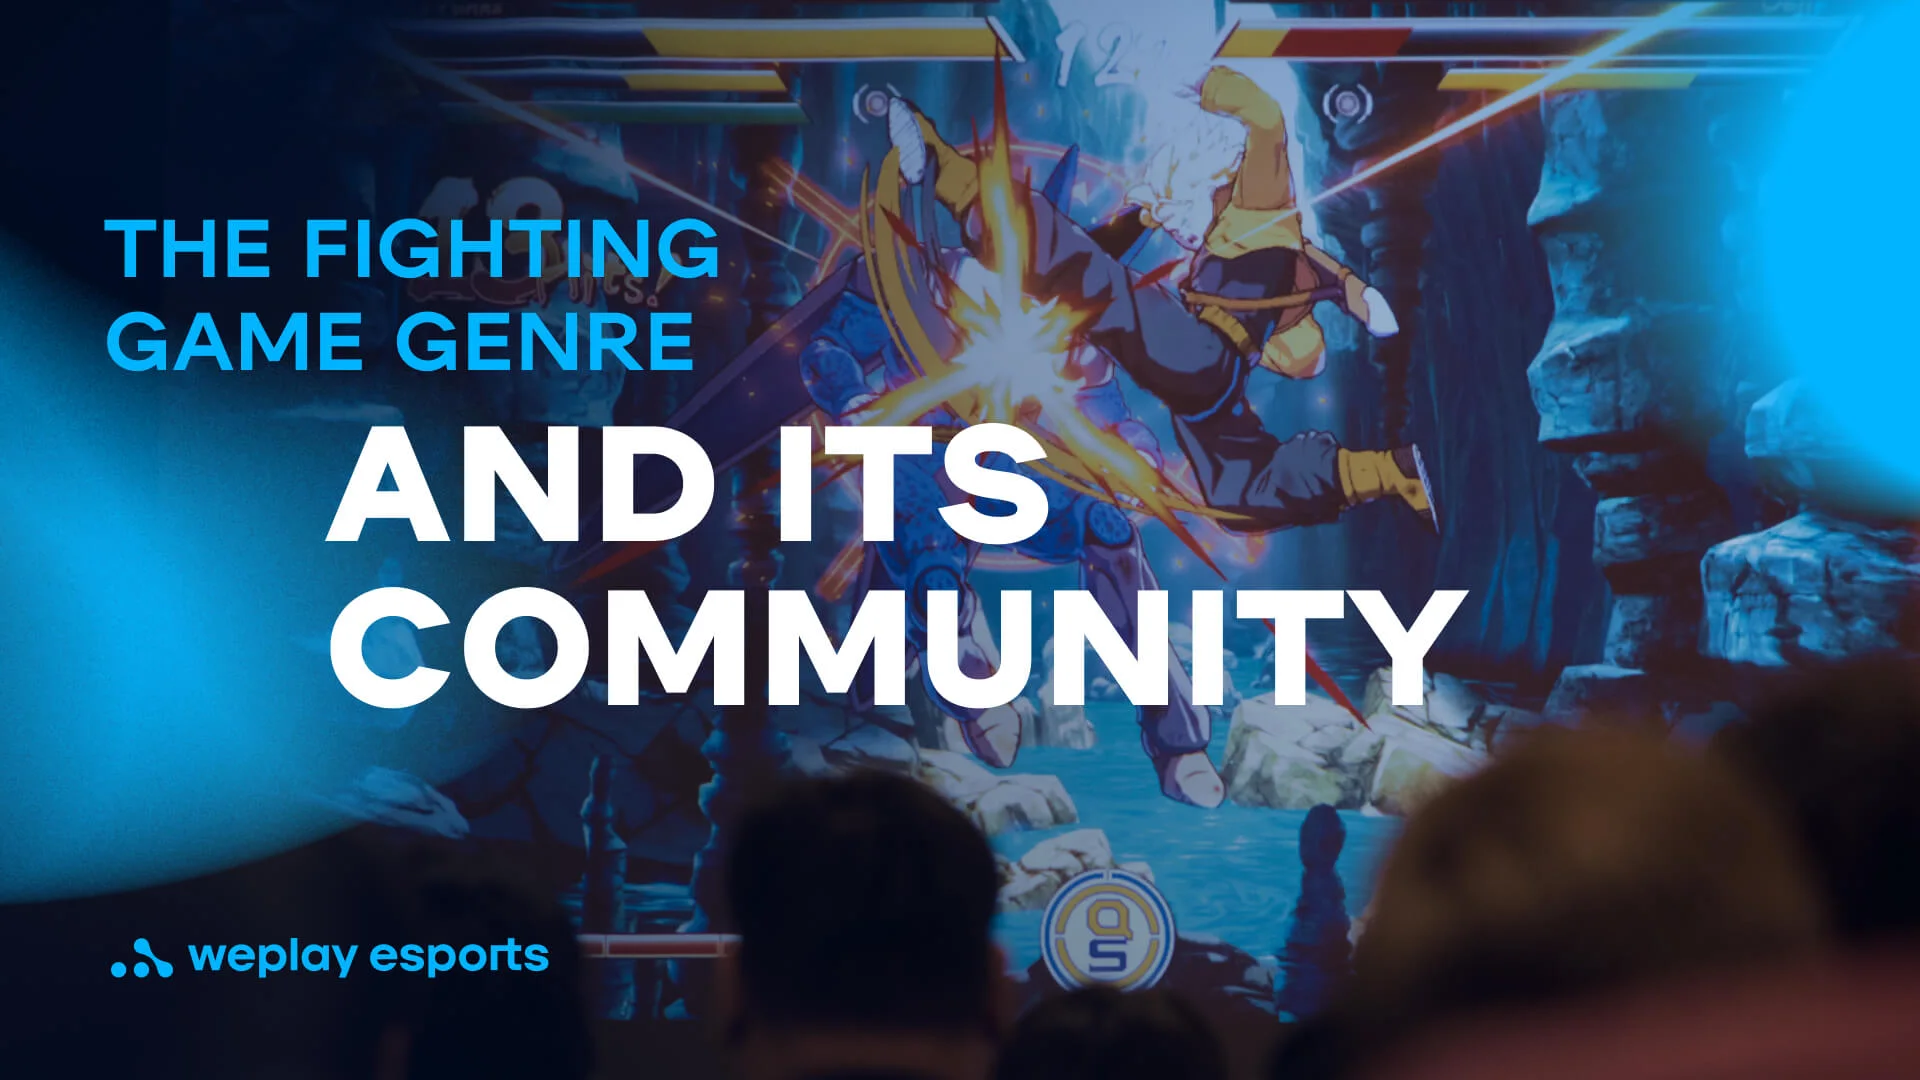 The fighting game genre and its community. Credit: WePlay Holding